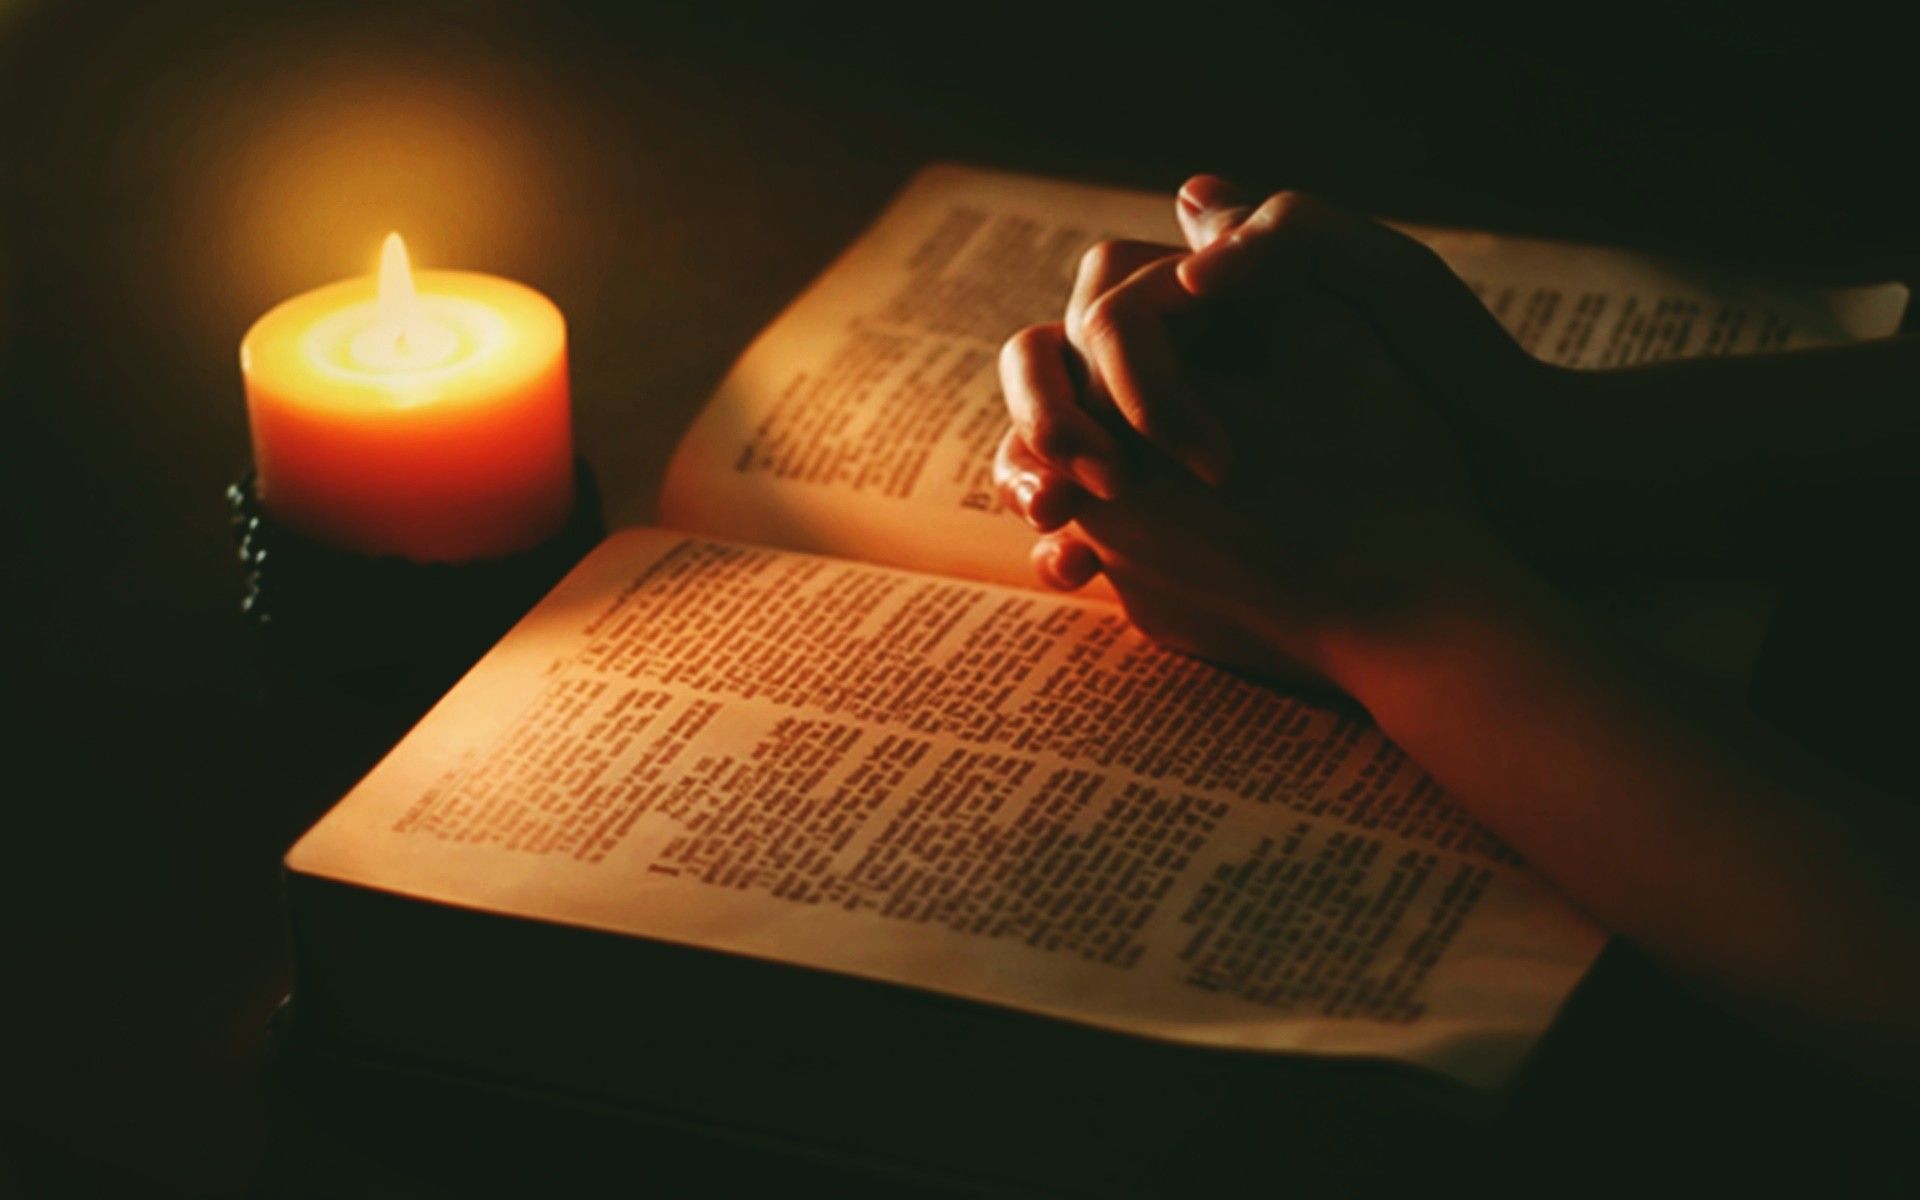 Wallpaper, lights, red, candles, prayer, Holy Bible, praying, light, color, candle, lighting, hand, shape, darkness 1920x1200